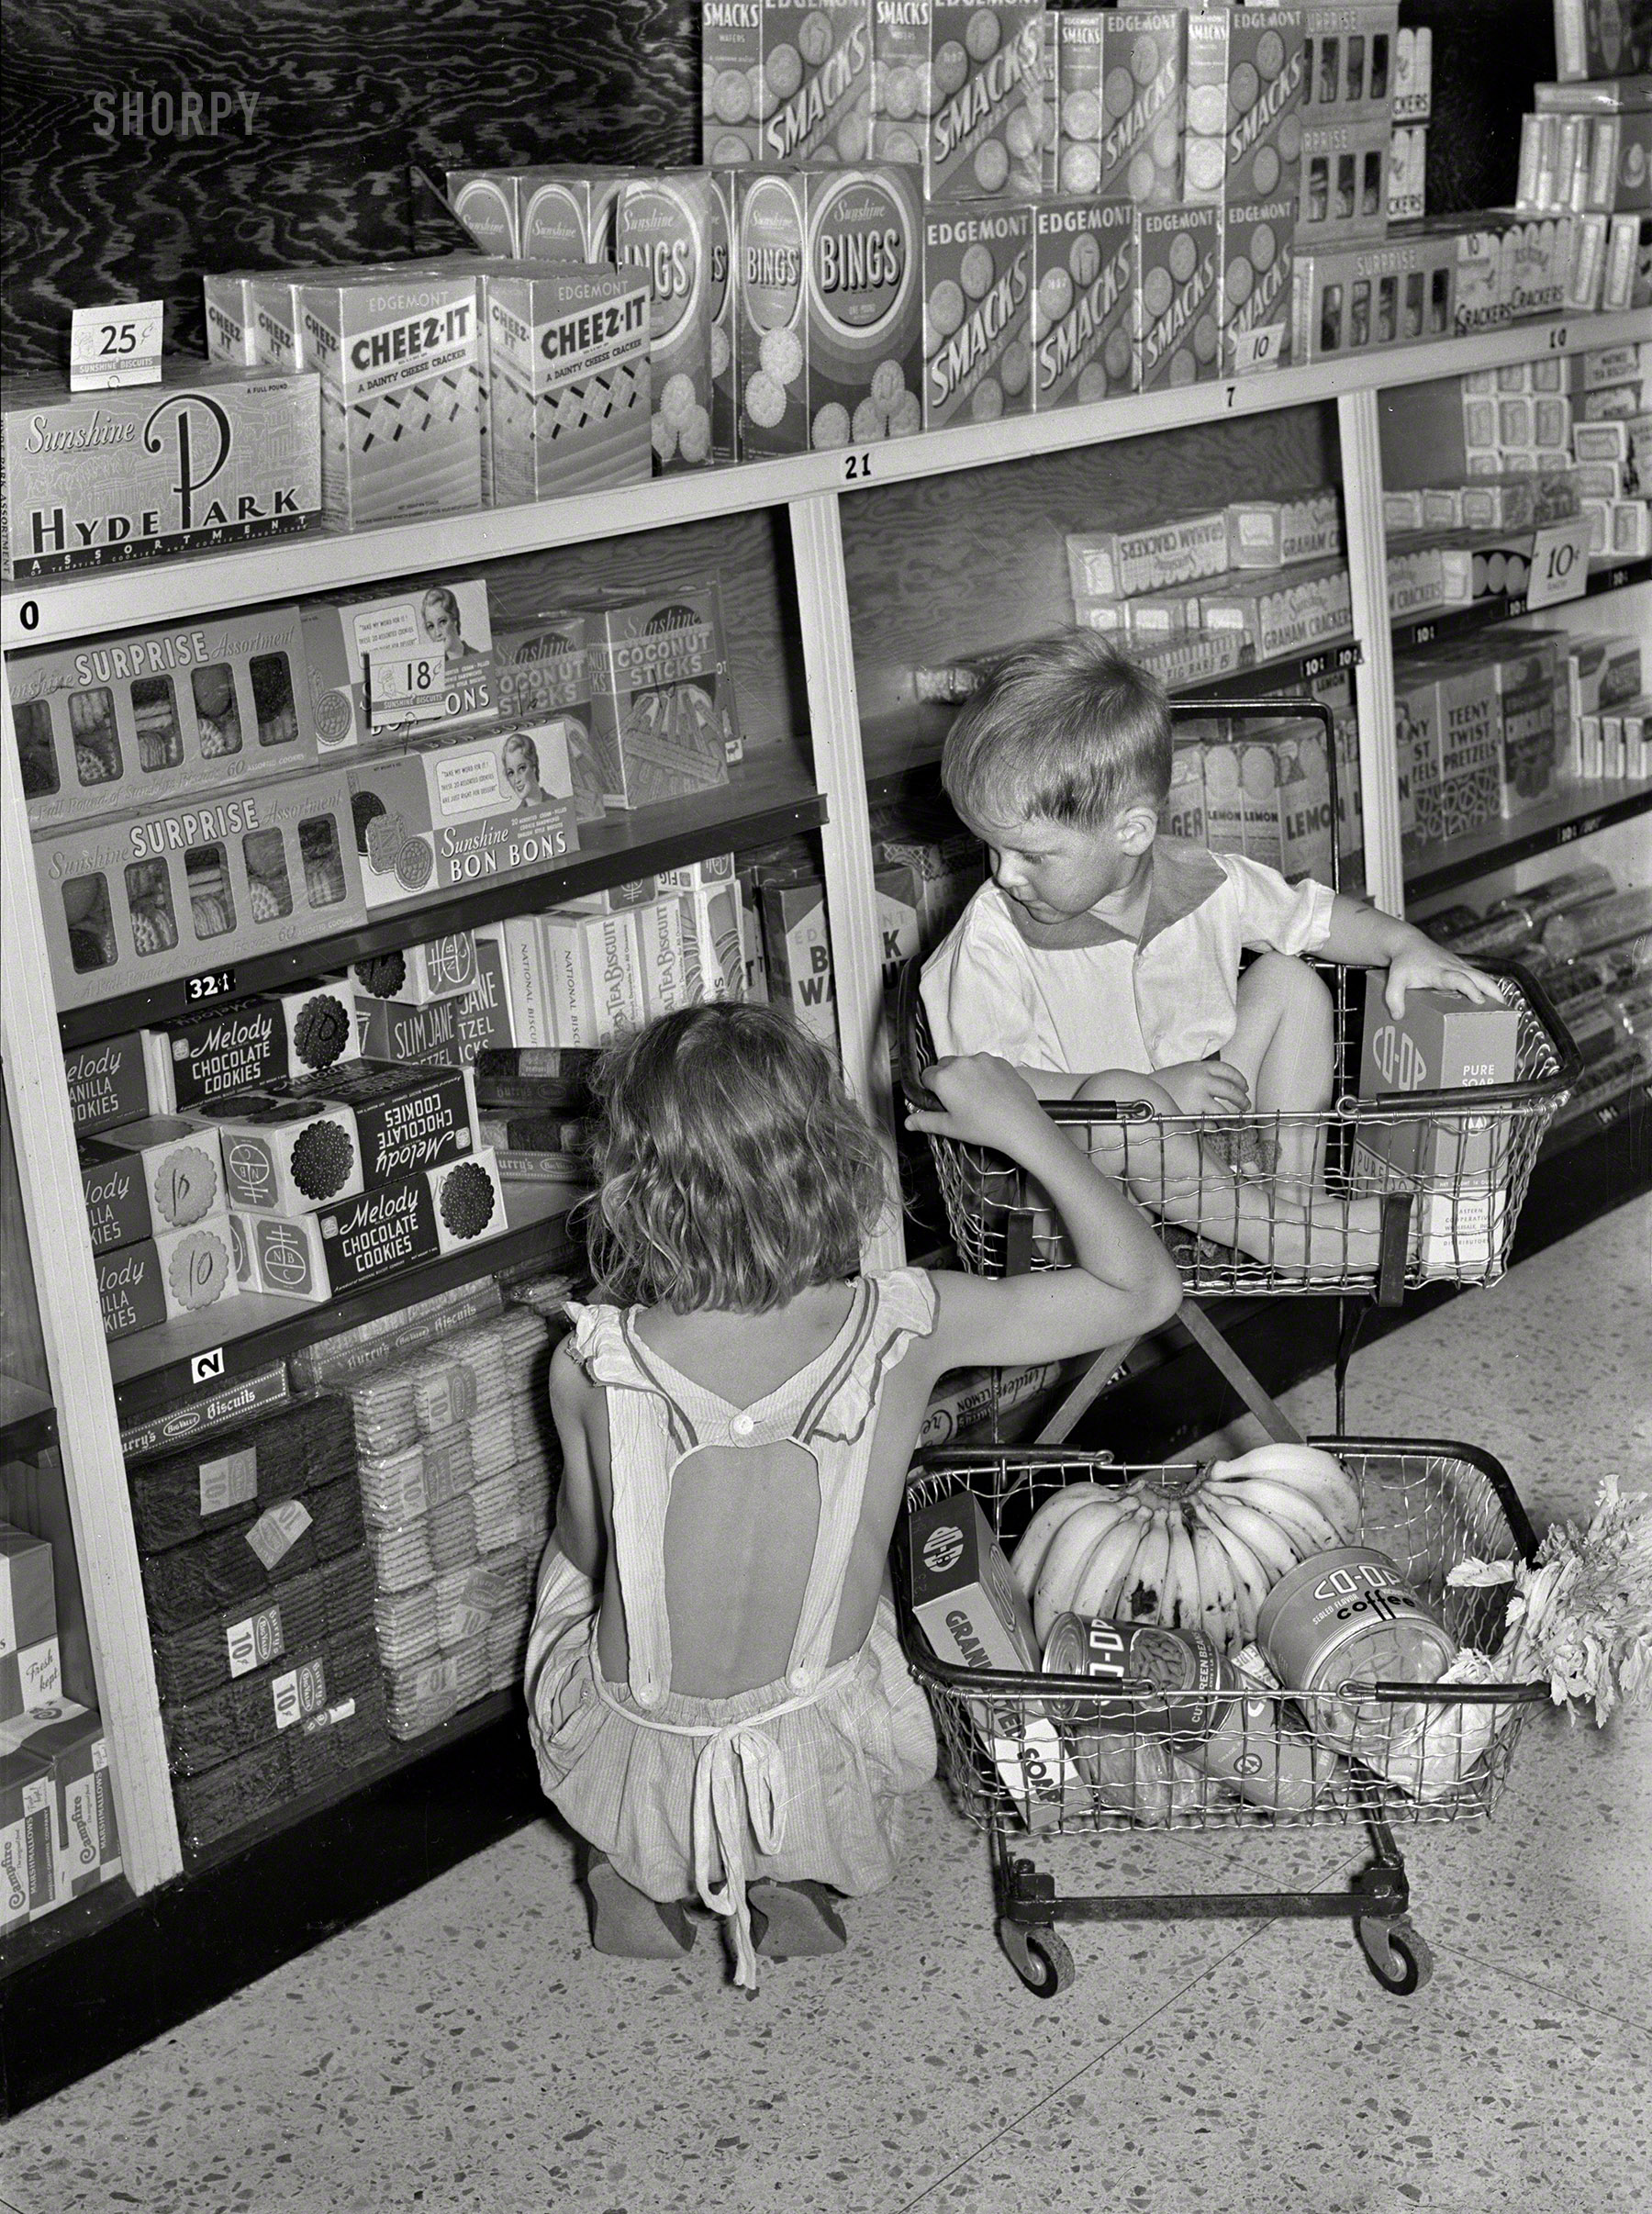 September 1938. "Children buying groceries in co-op store. Greenbelt, Maryland." Medium format negative by Marion Post Woolcott. View full size.